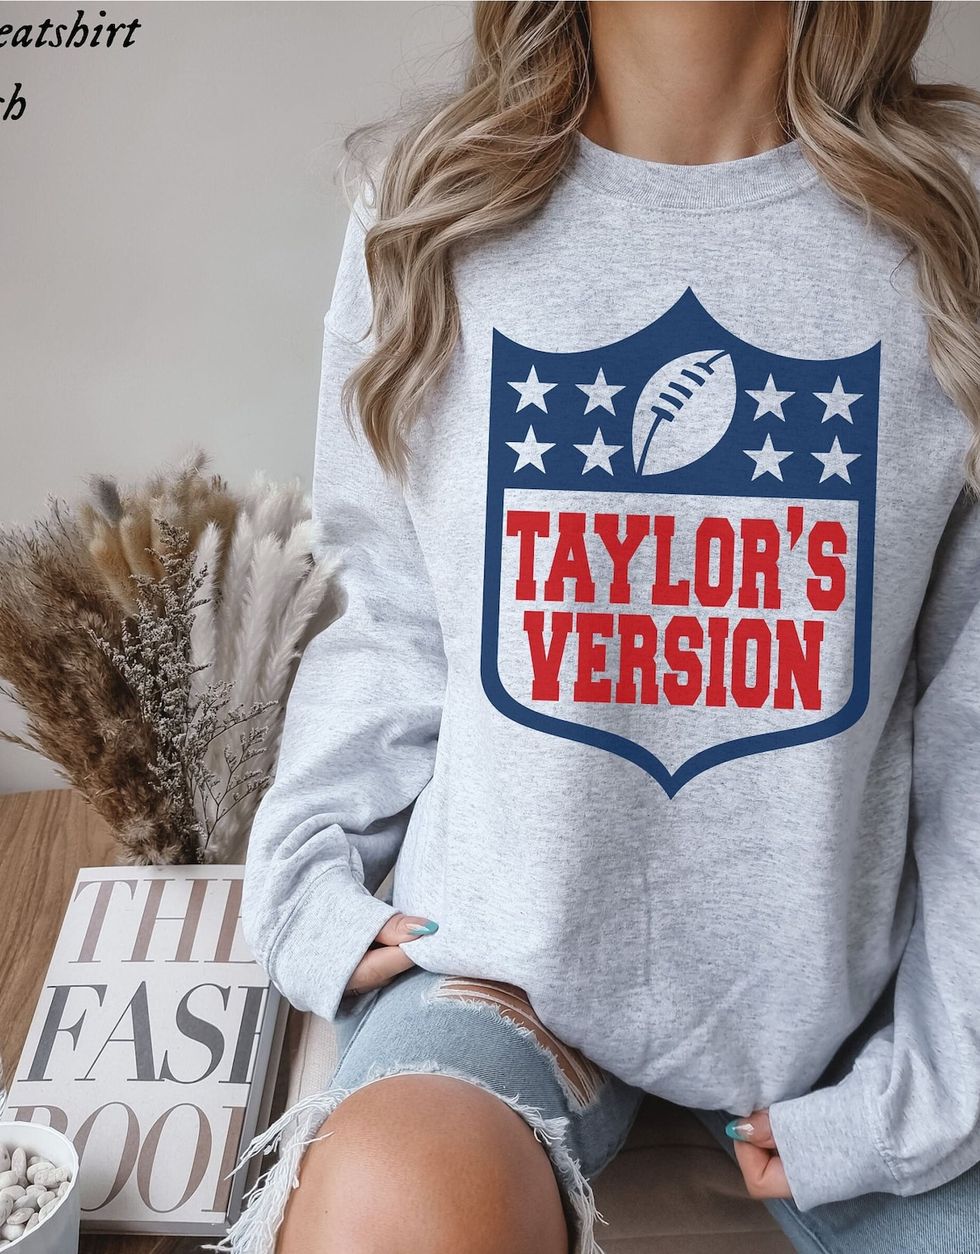 33 Outfits to Wear to the Taylor Swift Eras Tour Movie